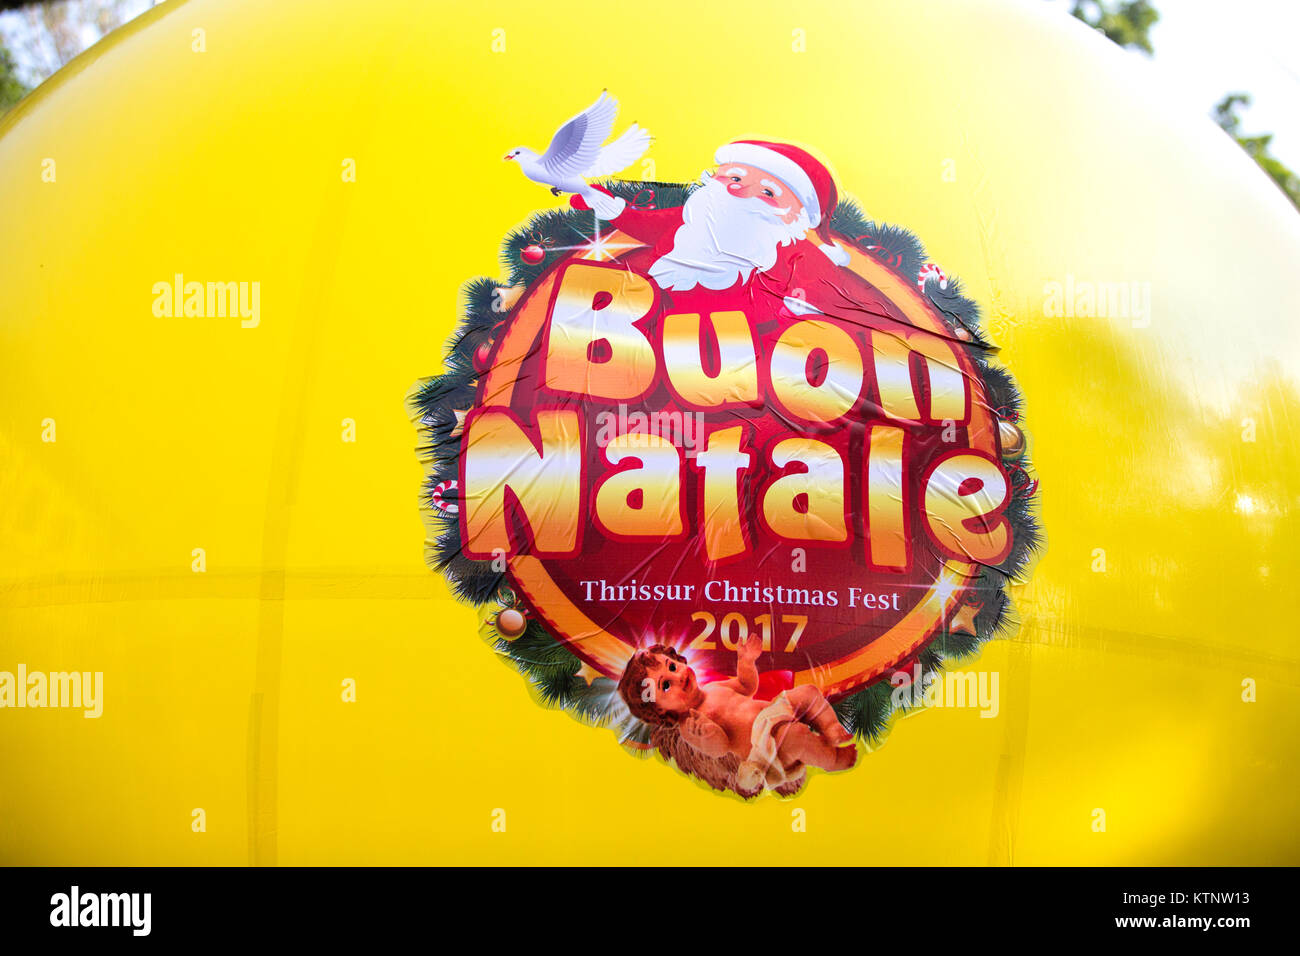 Buon Natale Thrissur 2020.Buon Natale Thrissur High Resolution Stock Photography And Images Alamy